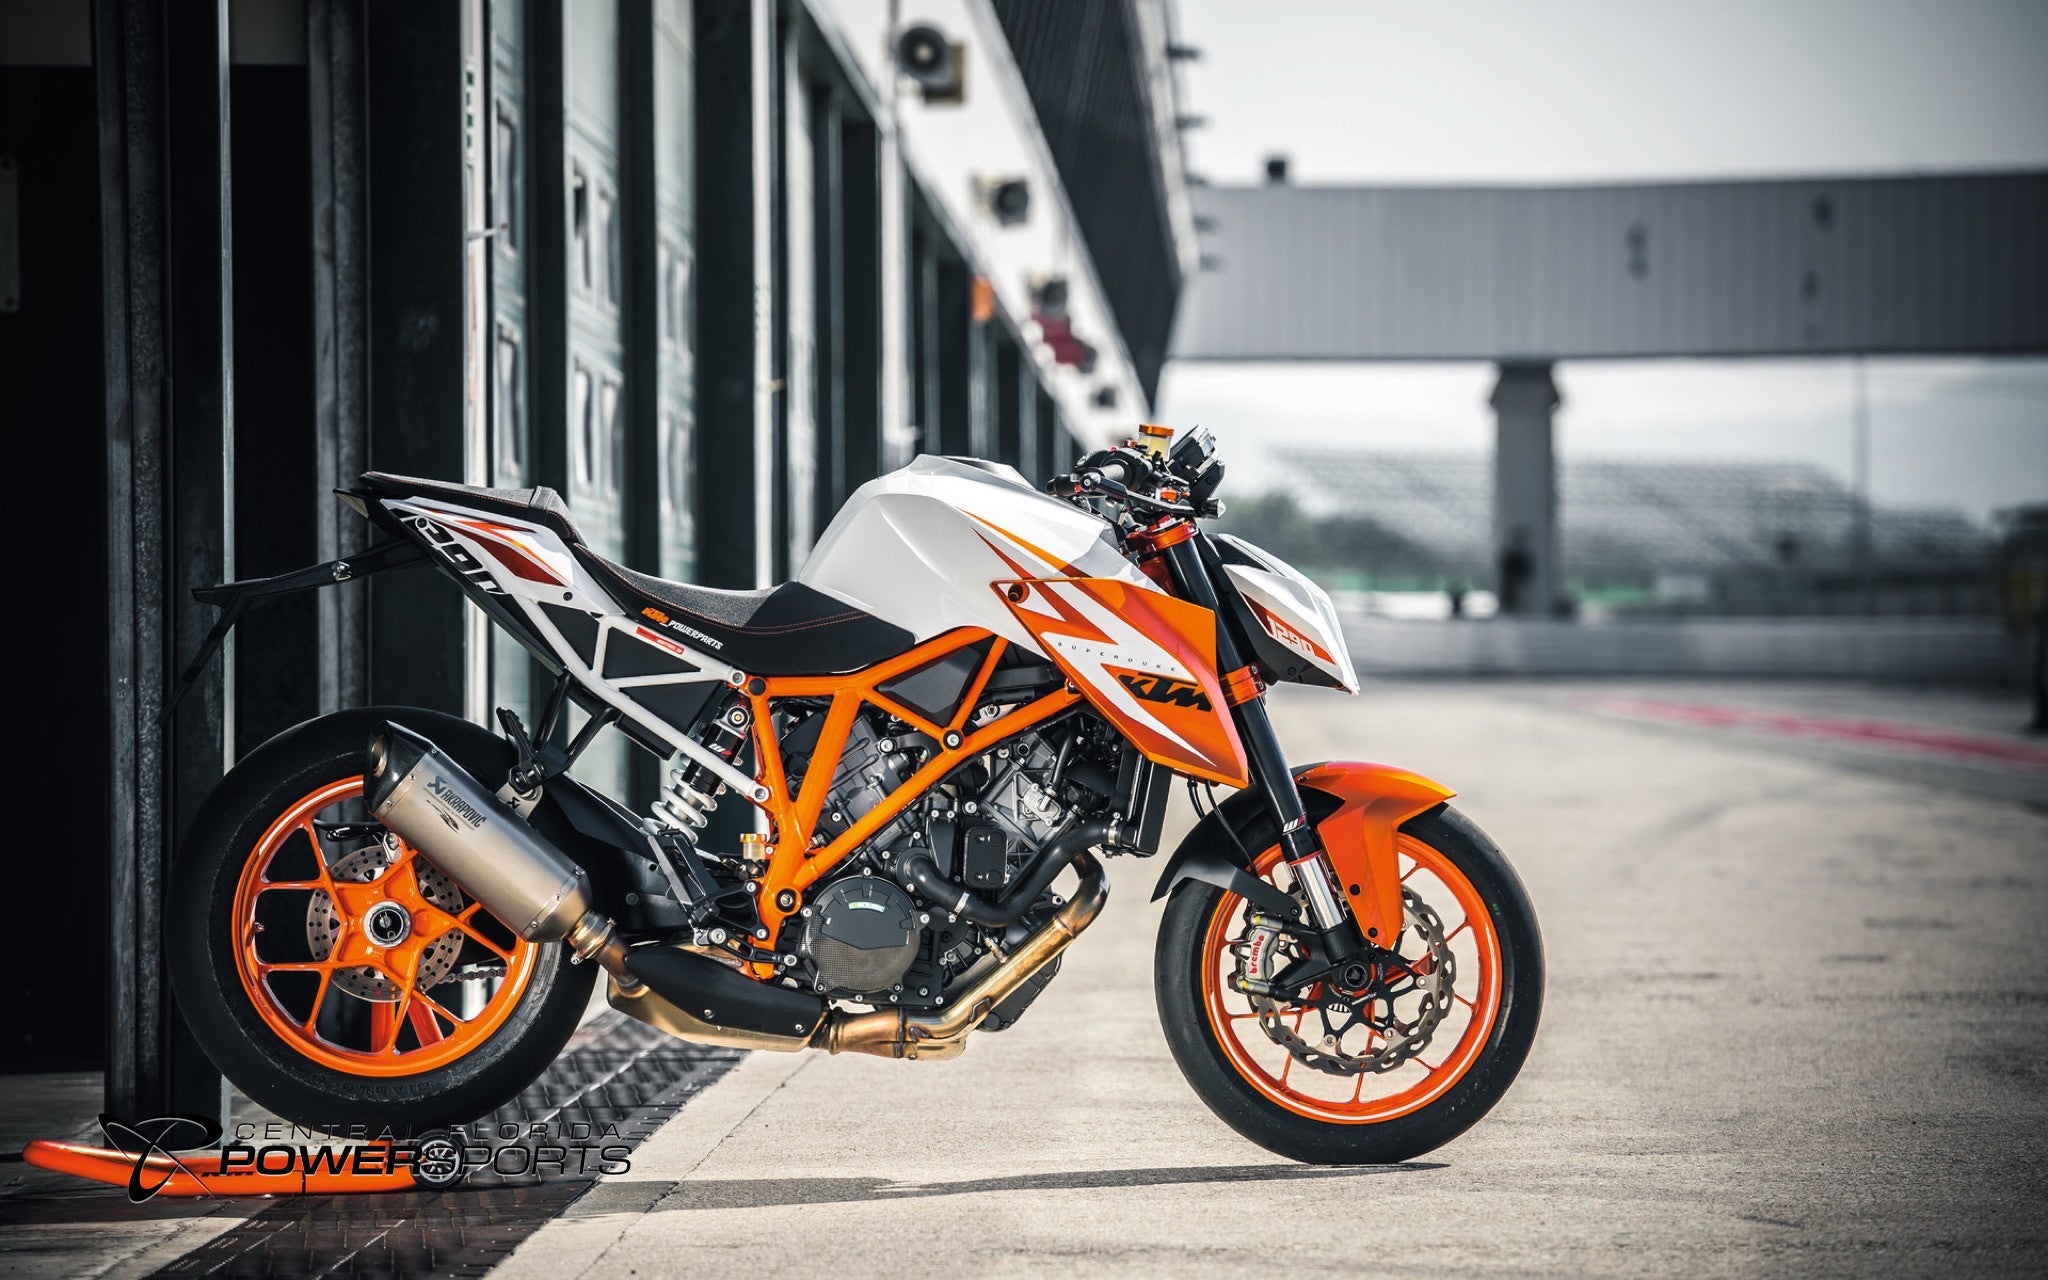 Introducing the 2016 KTM 1290 Super Duke R Special Edition